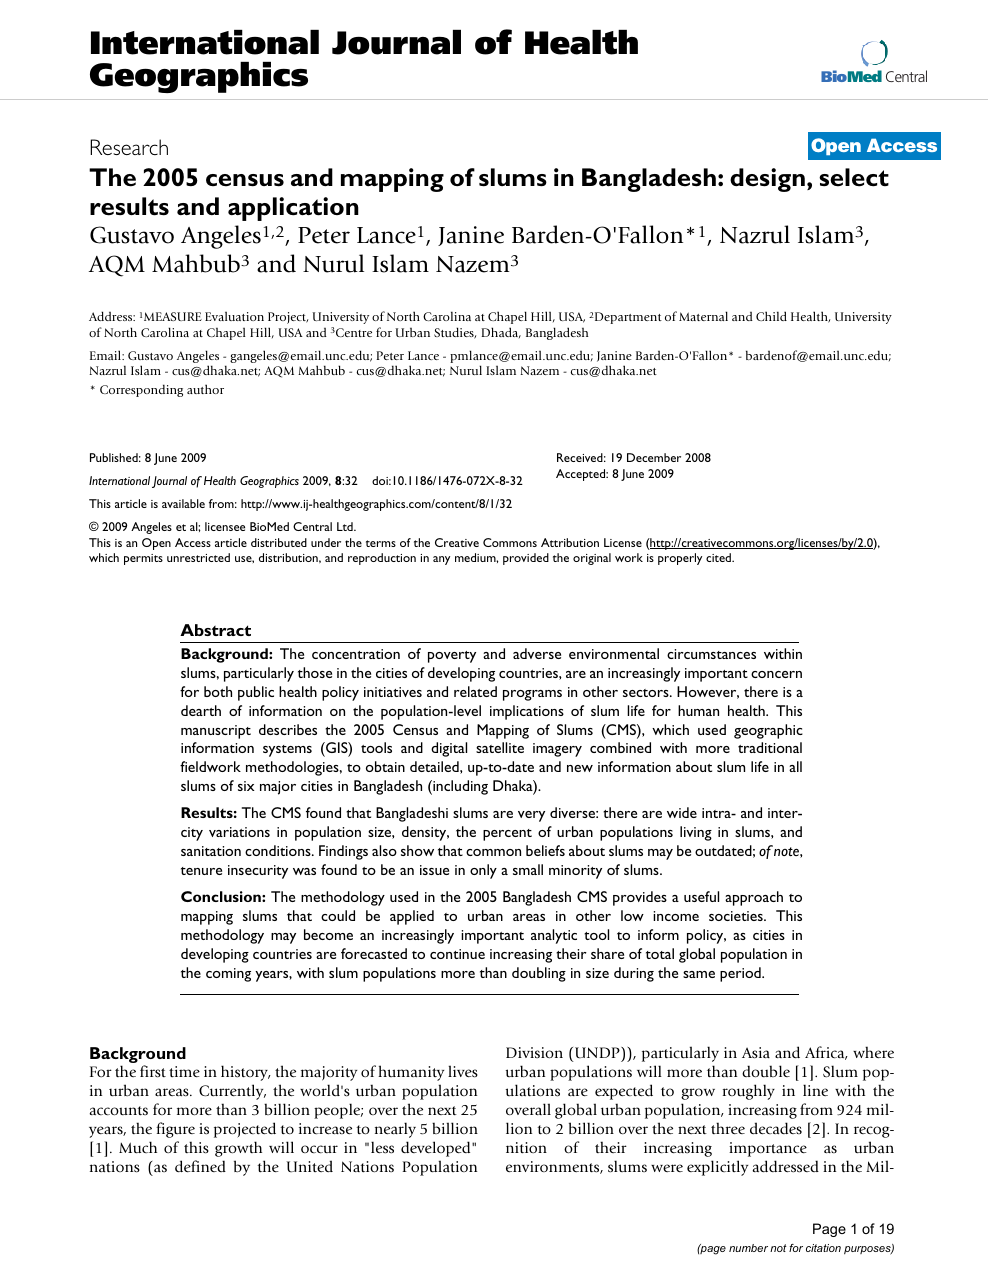 The 05 Census And Mapping Of Slums In Bangladesh Design Select Results And Application Topic Of Research Paper In Health Sciences Download Scholarly Article Pdf And Read For Free On Cyberleninka